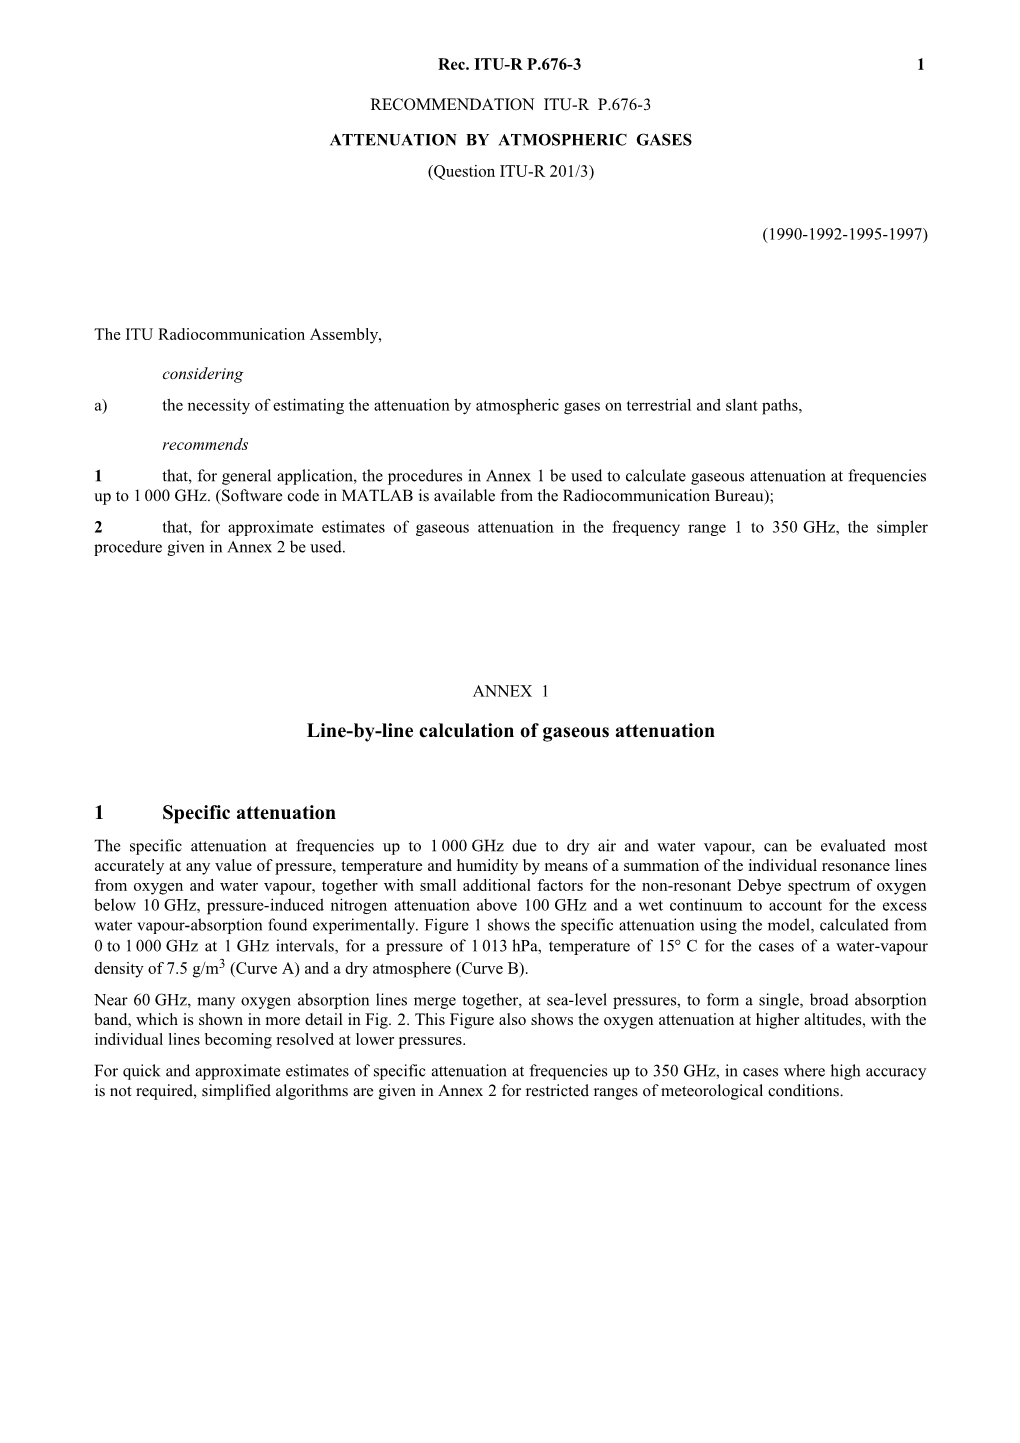 P.676-3 - Attenuation by Atmospheric Gases